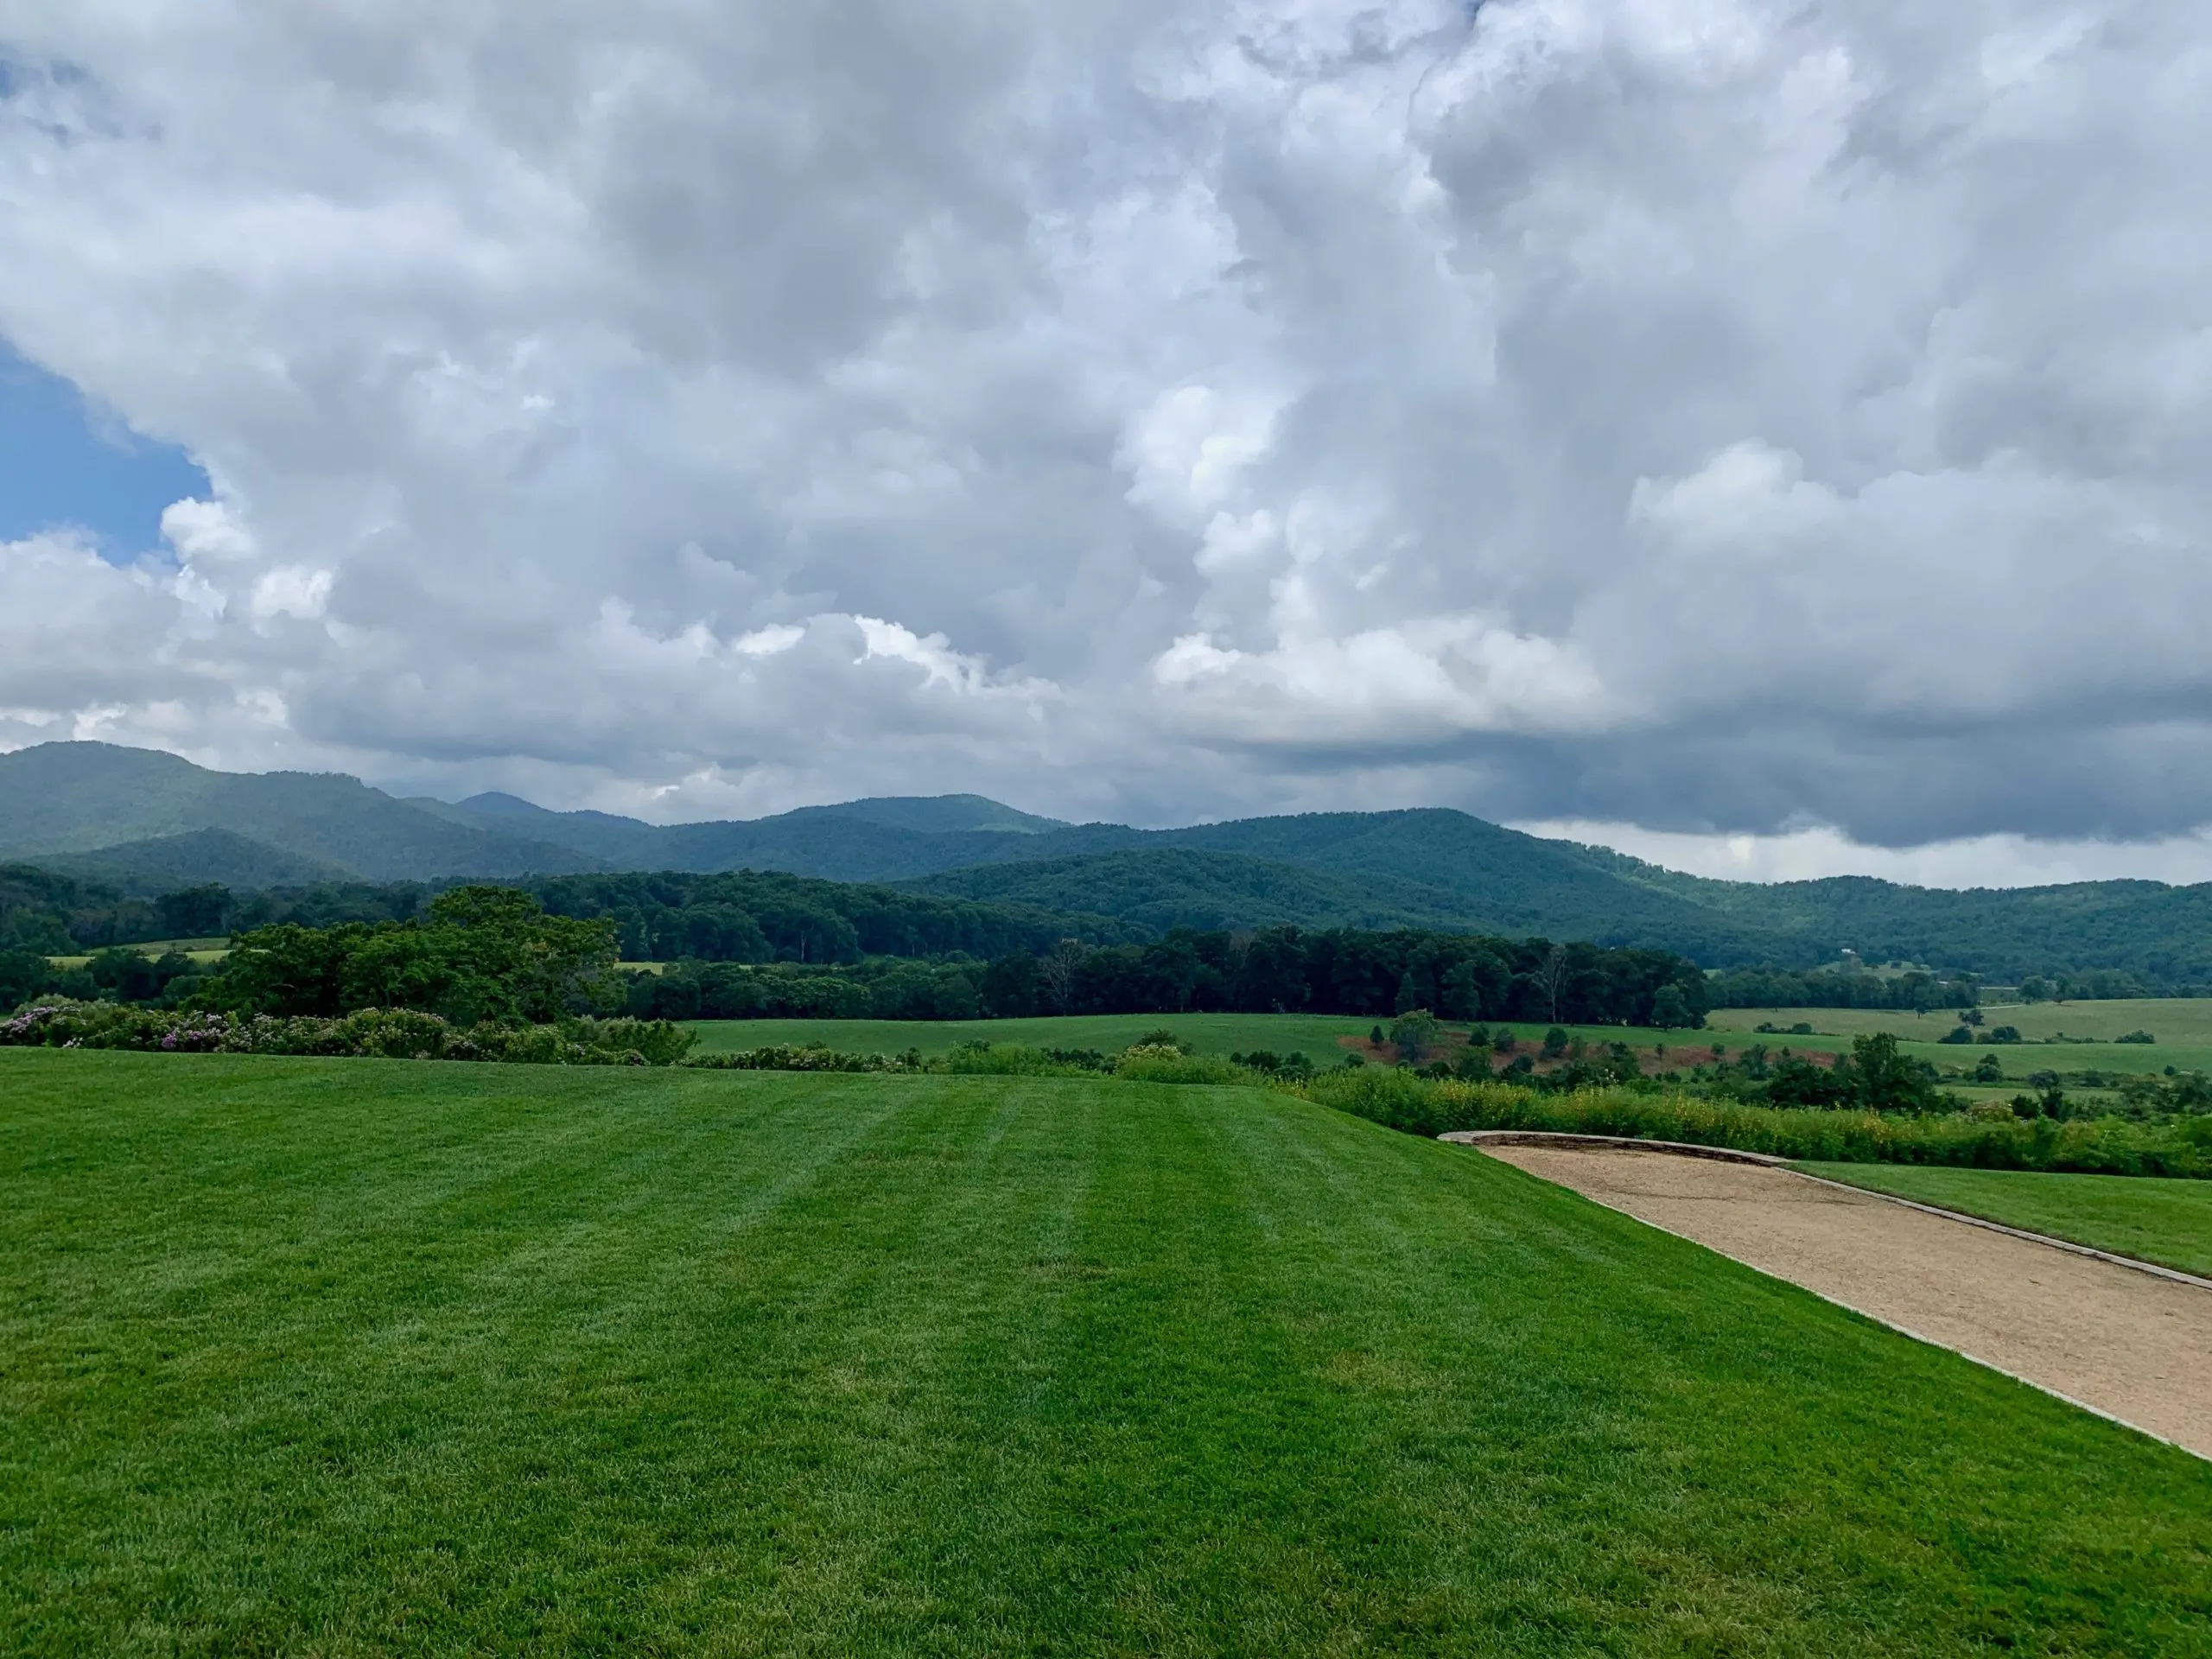 A green field with mountains in the background and Pippin Hill Farm